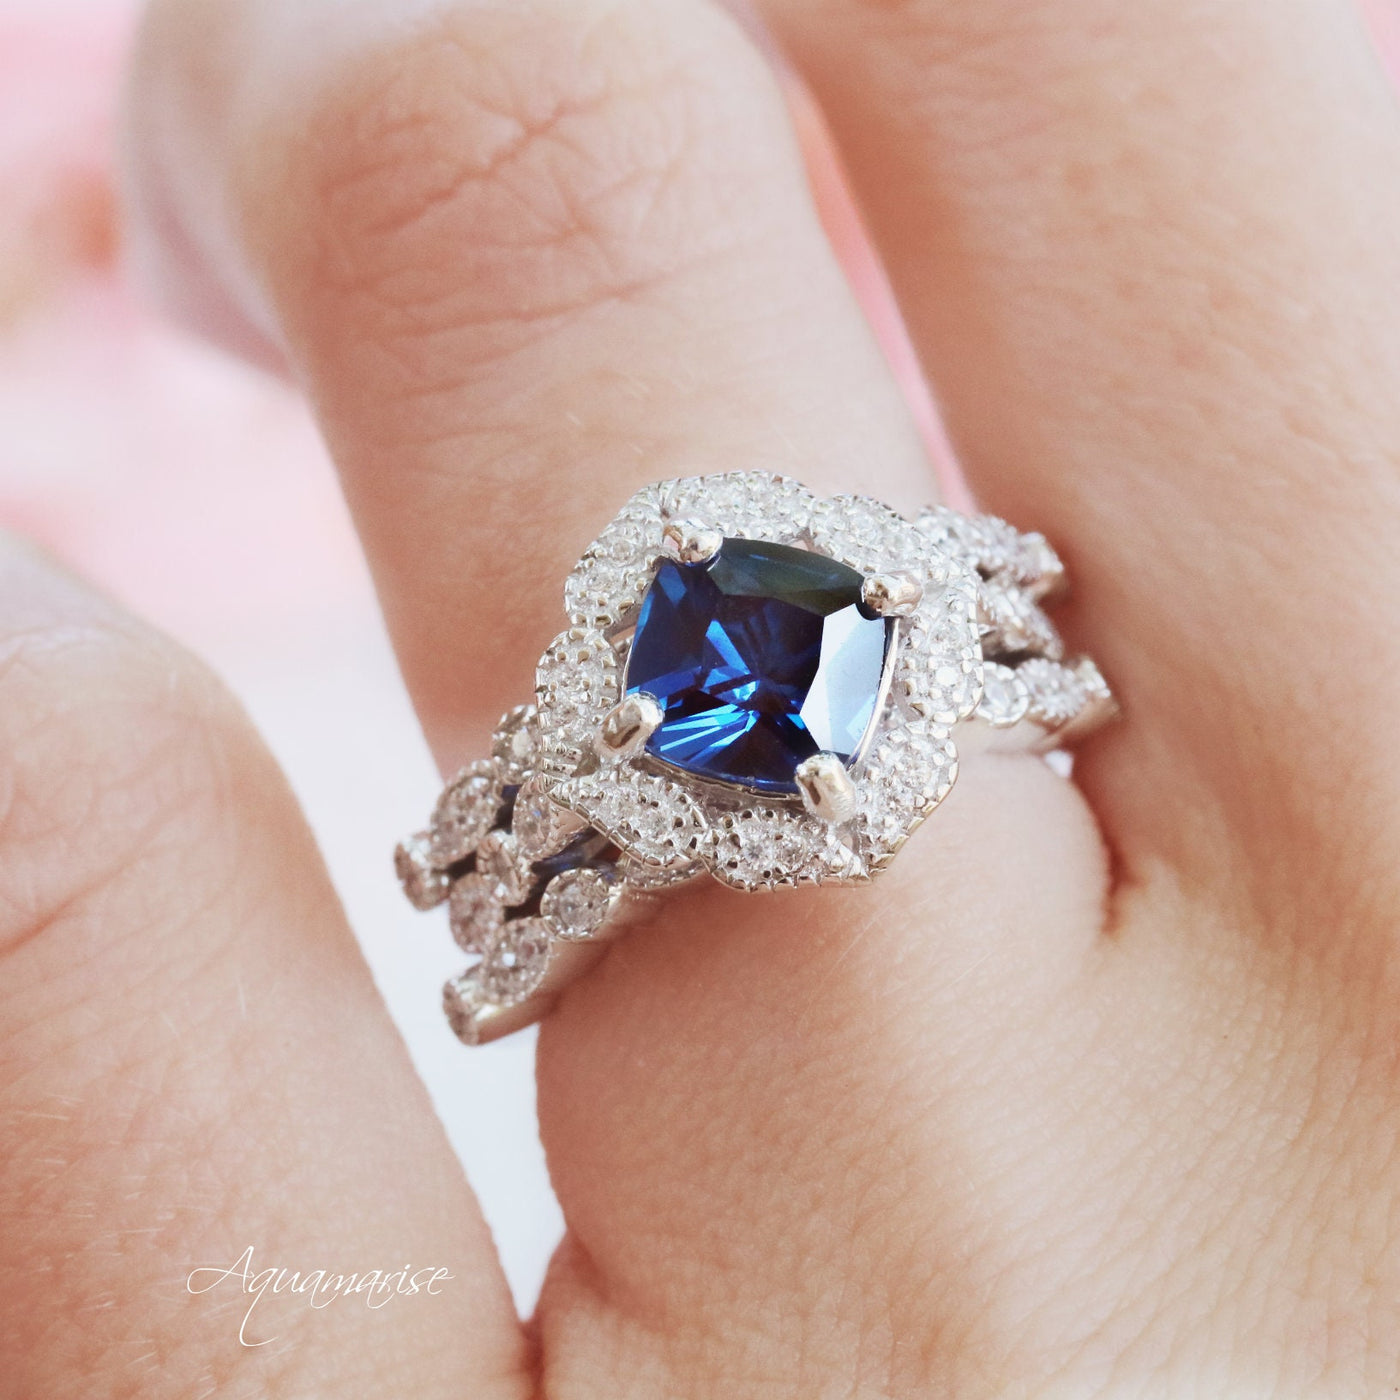 Luxe Sapphire Ring -Sterling Silver